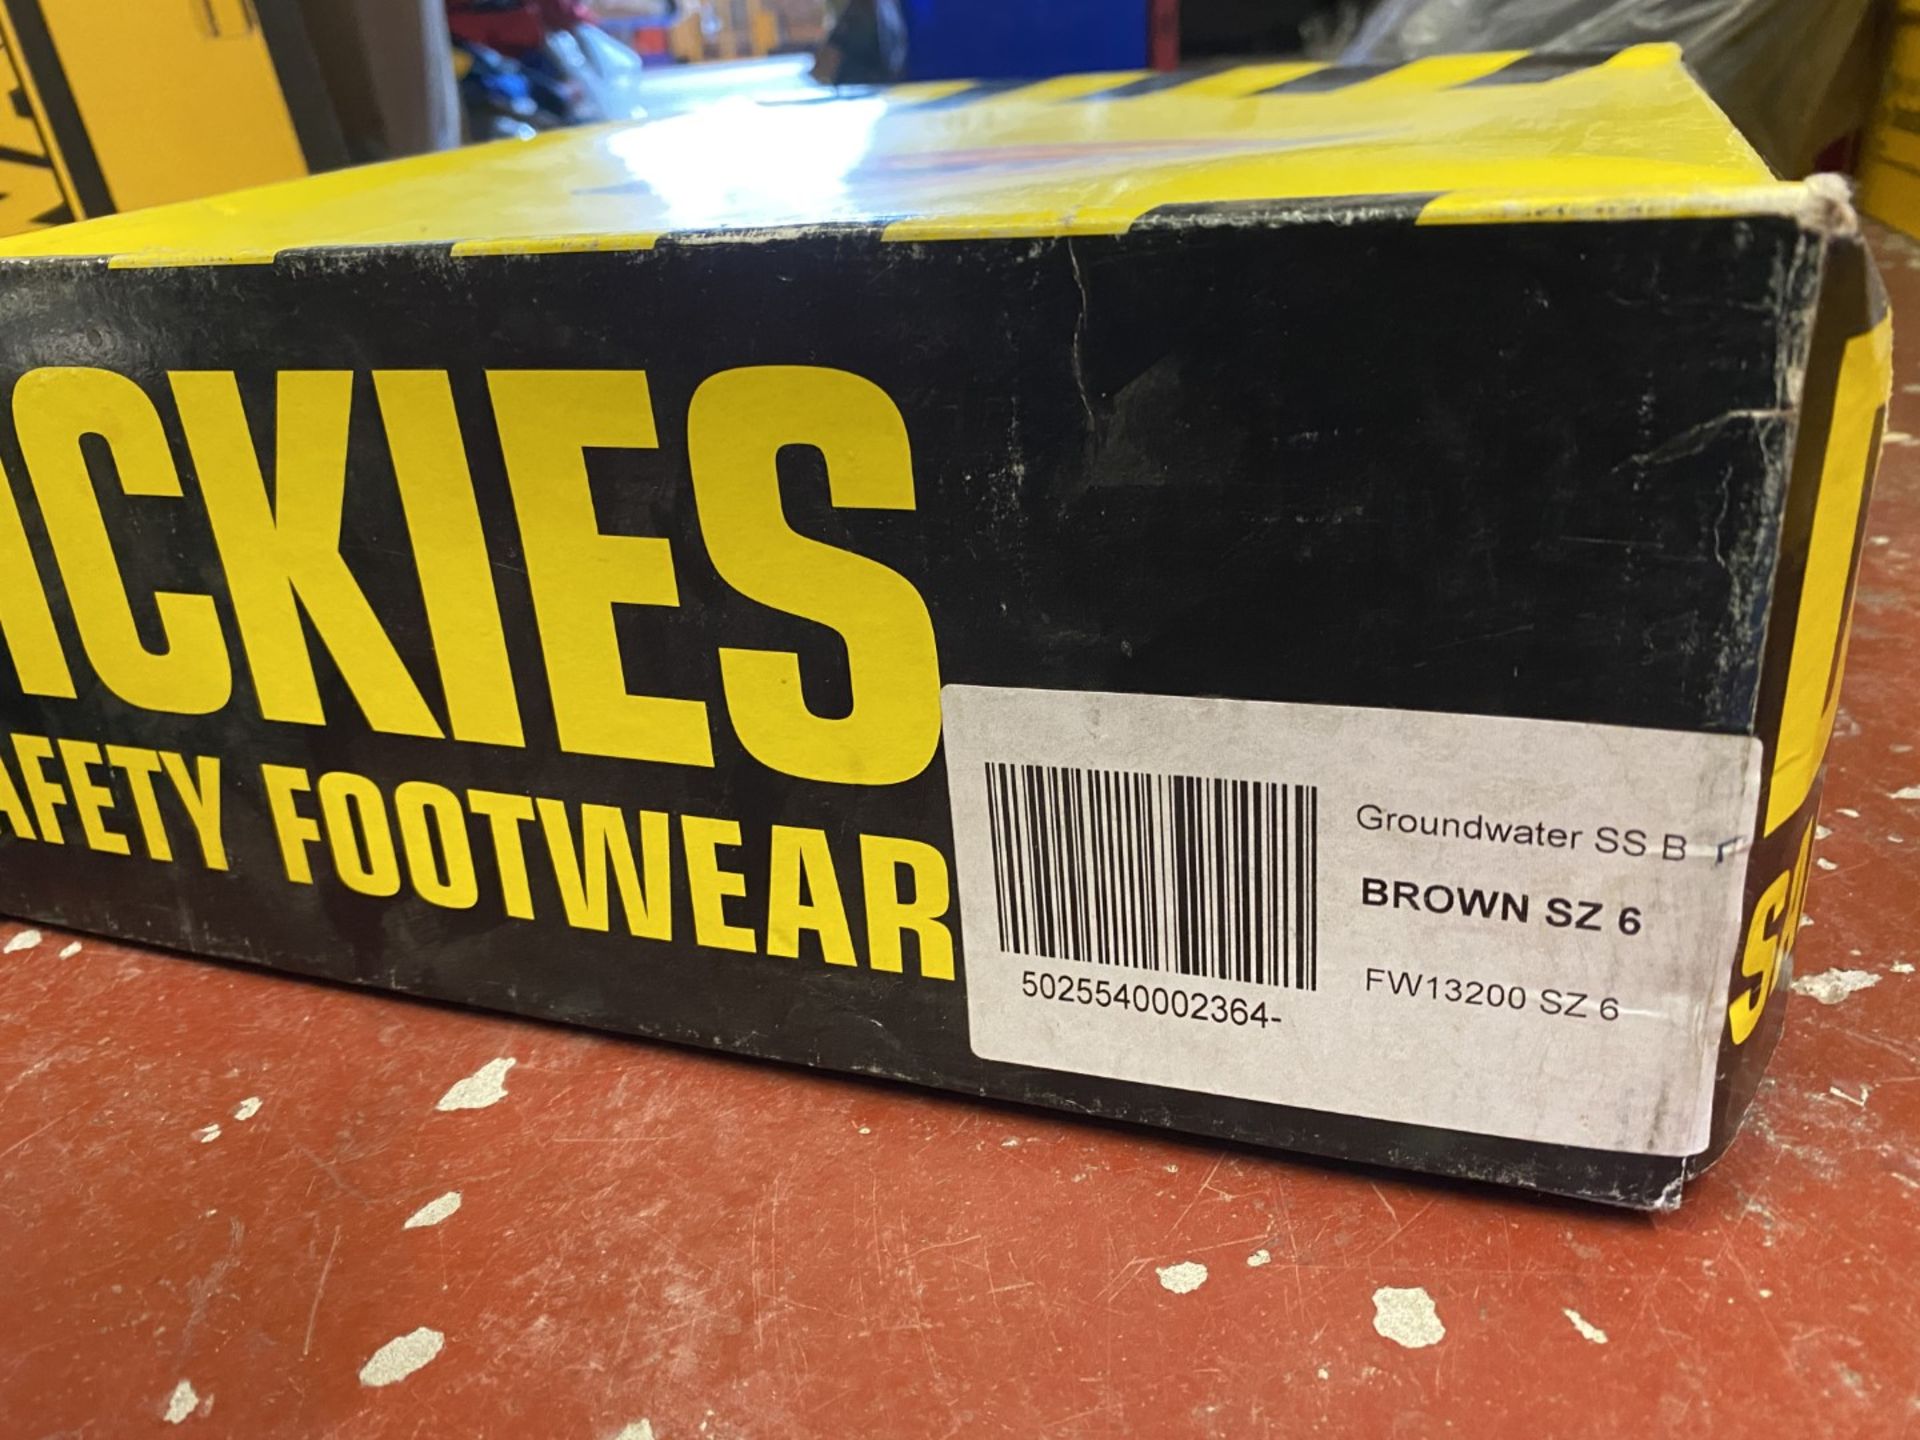 NEW Dickies safety boots, UK size 6